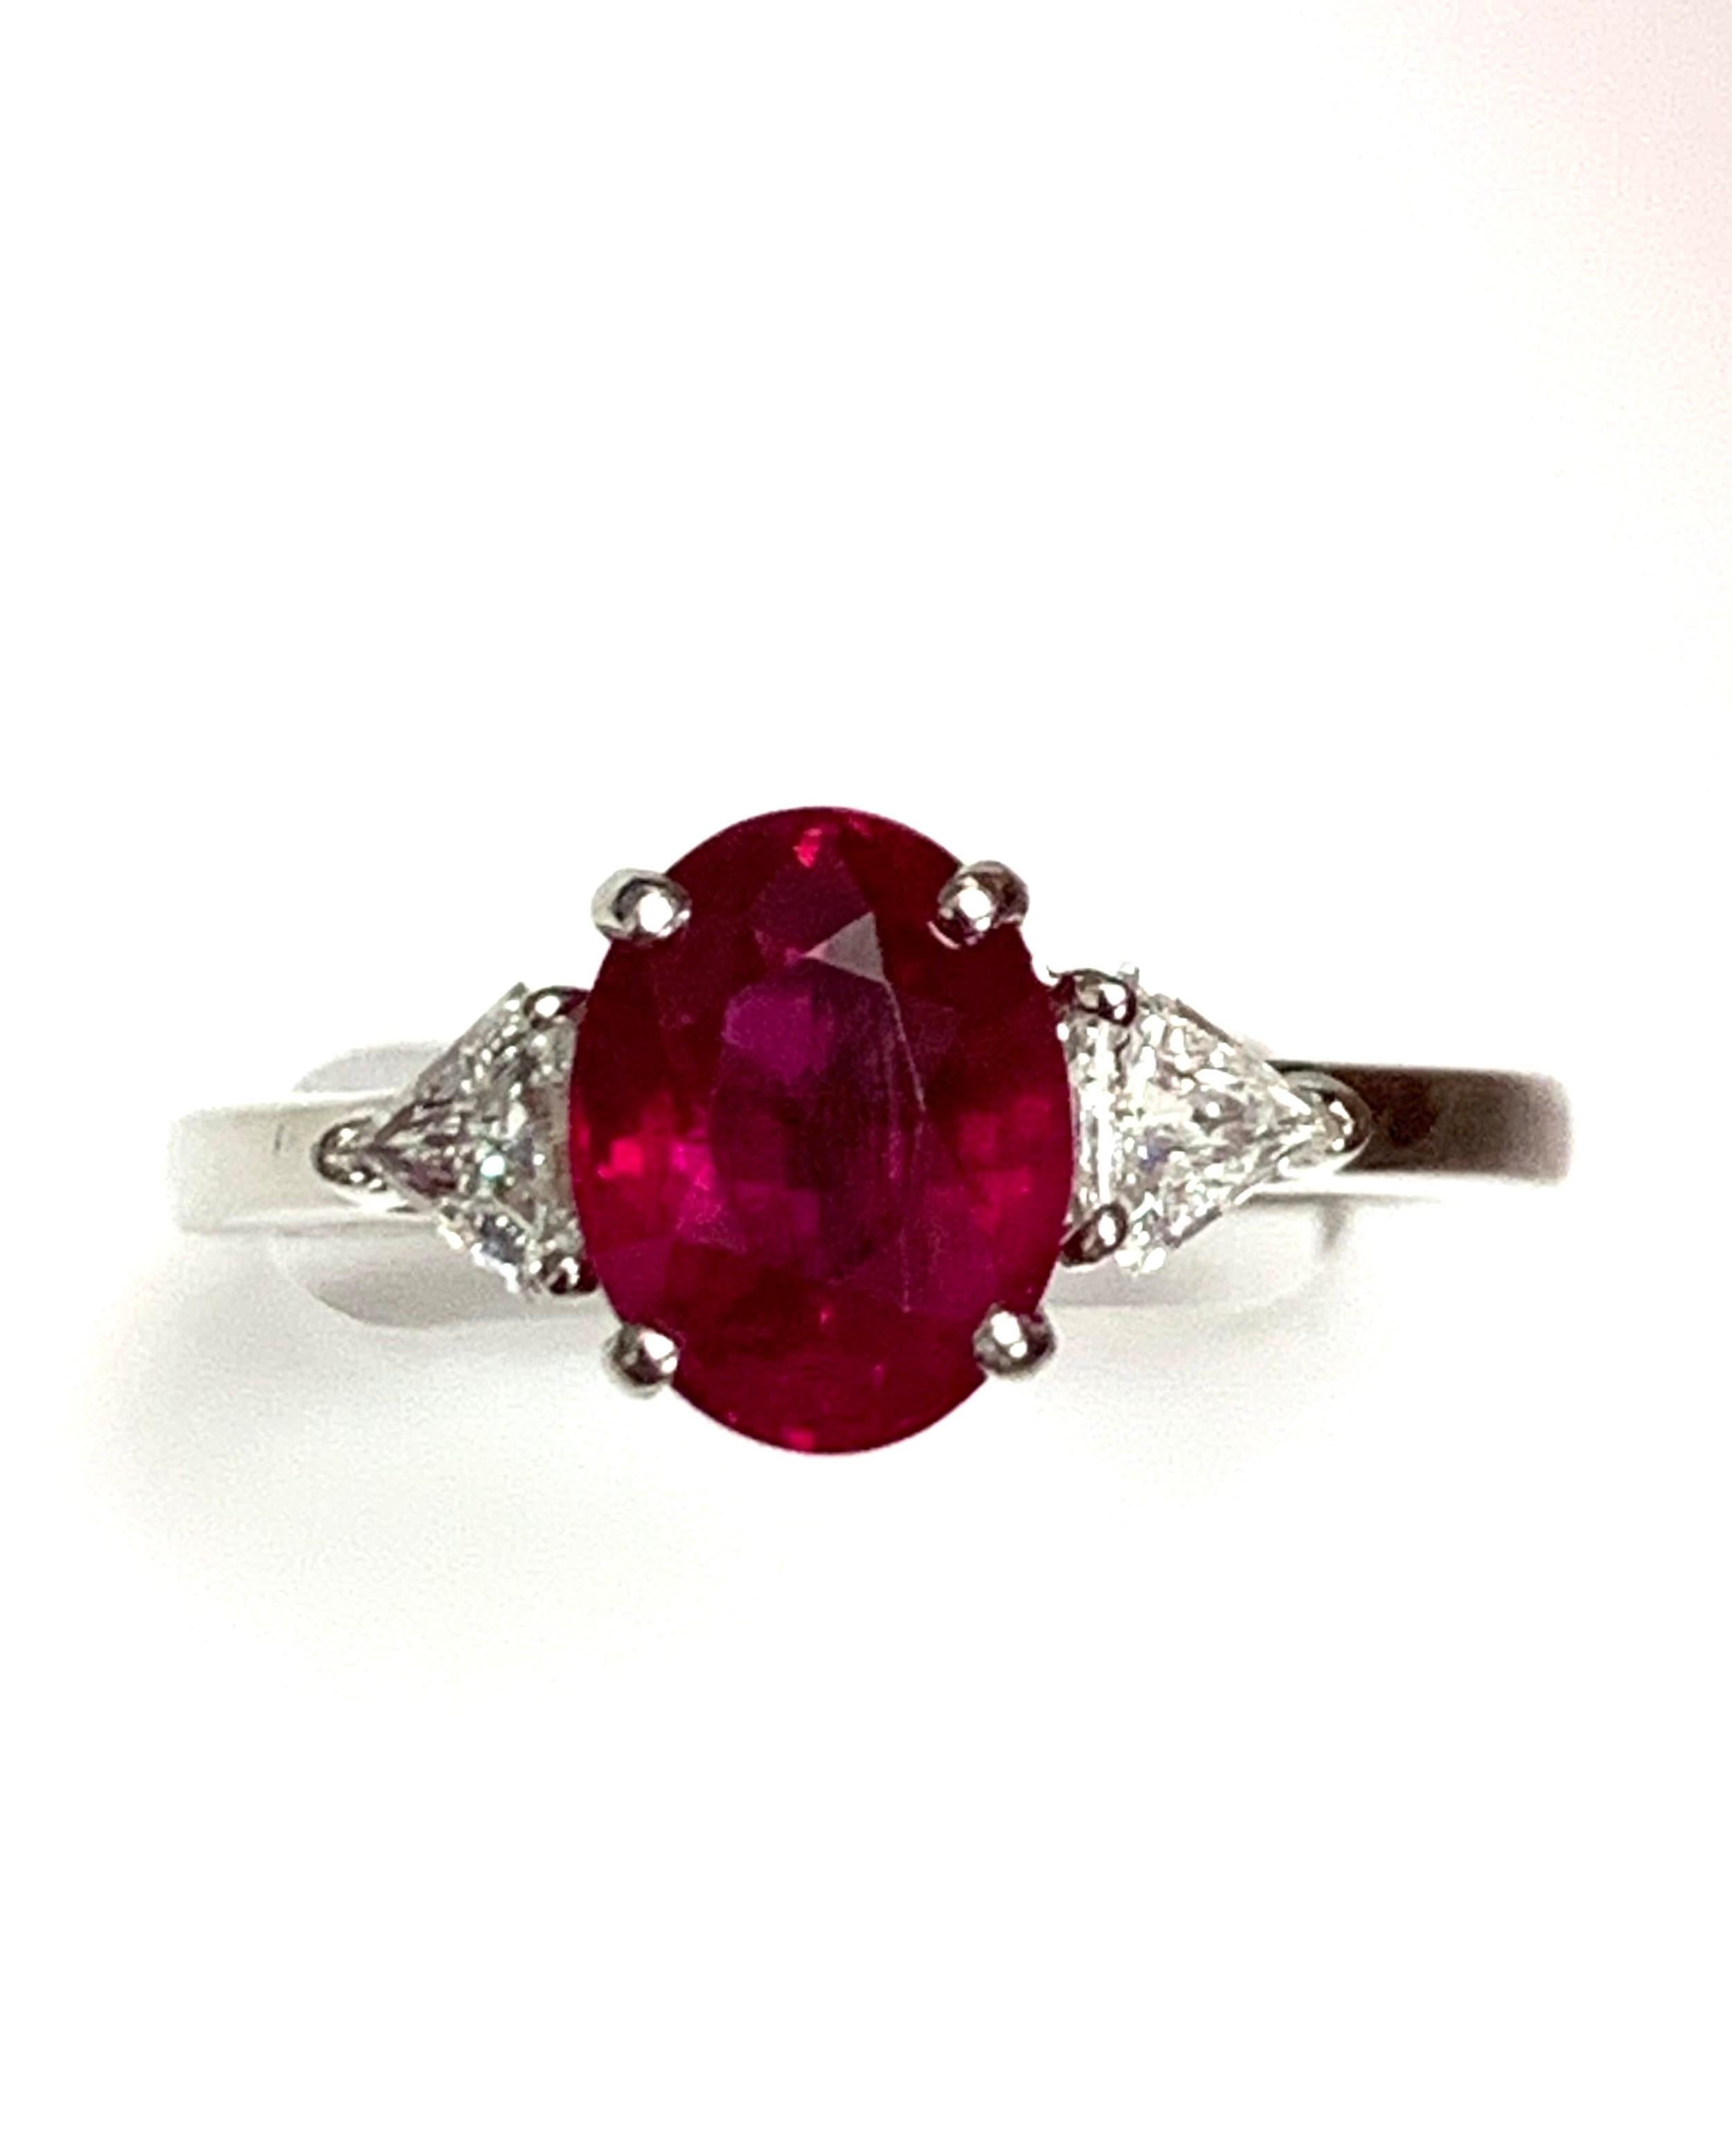 2.34 Carat oval Burma Ruby set in platinum hand made three stone ring with 0.34 carat shield cut G-h clean diamonds 